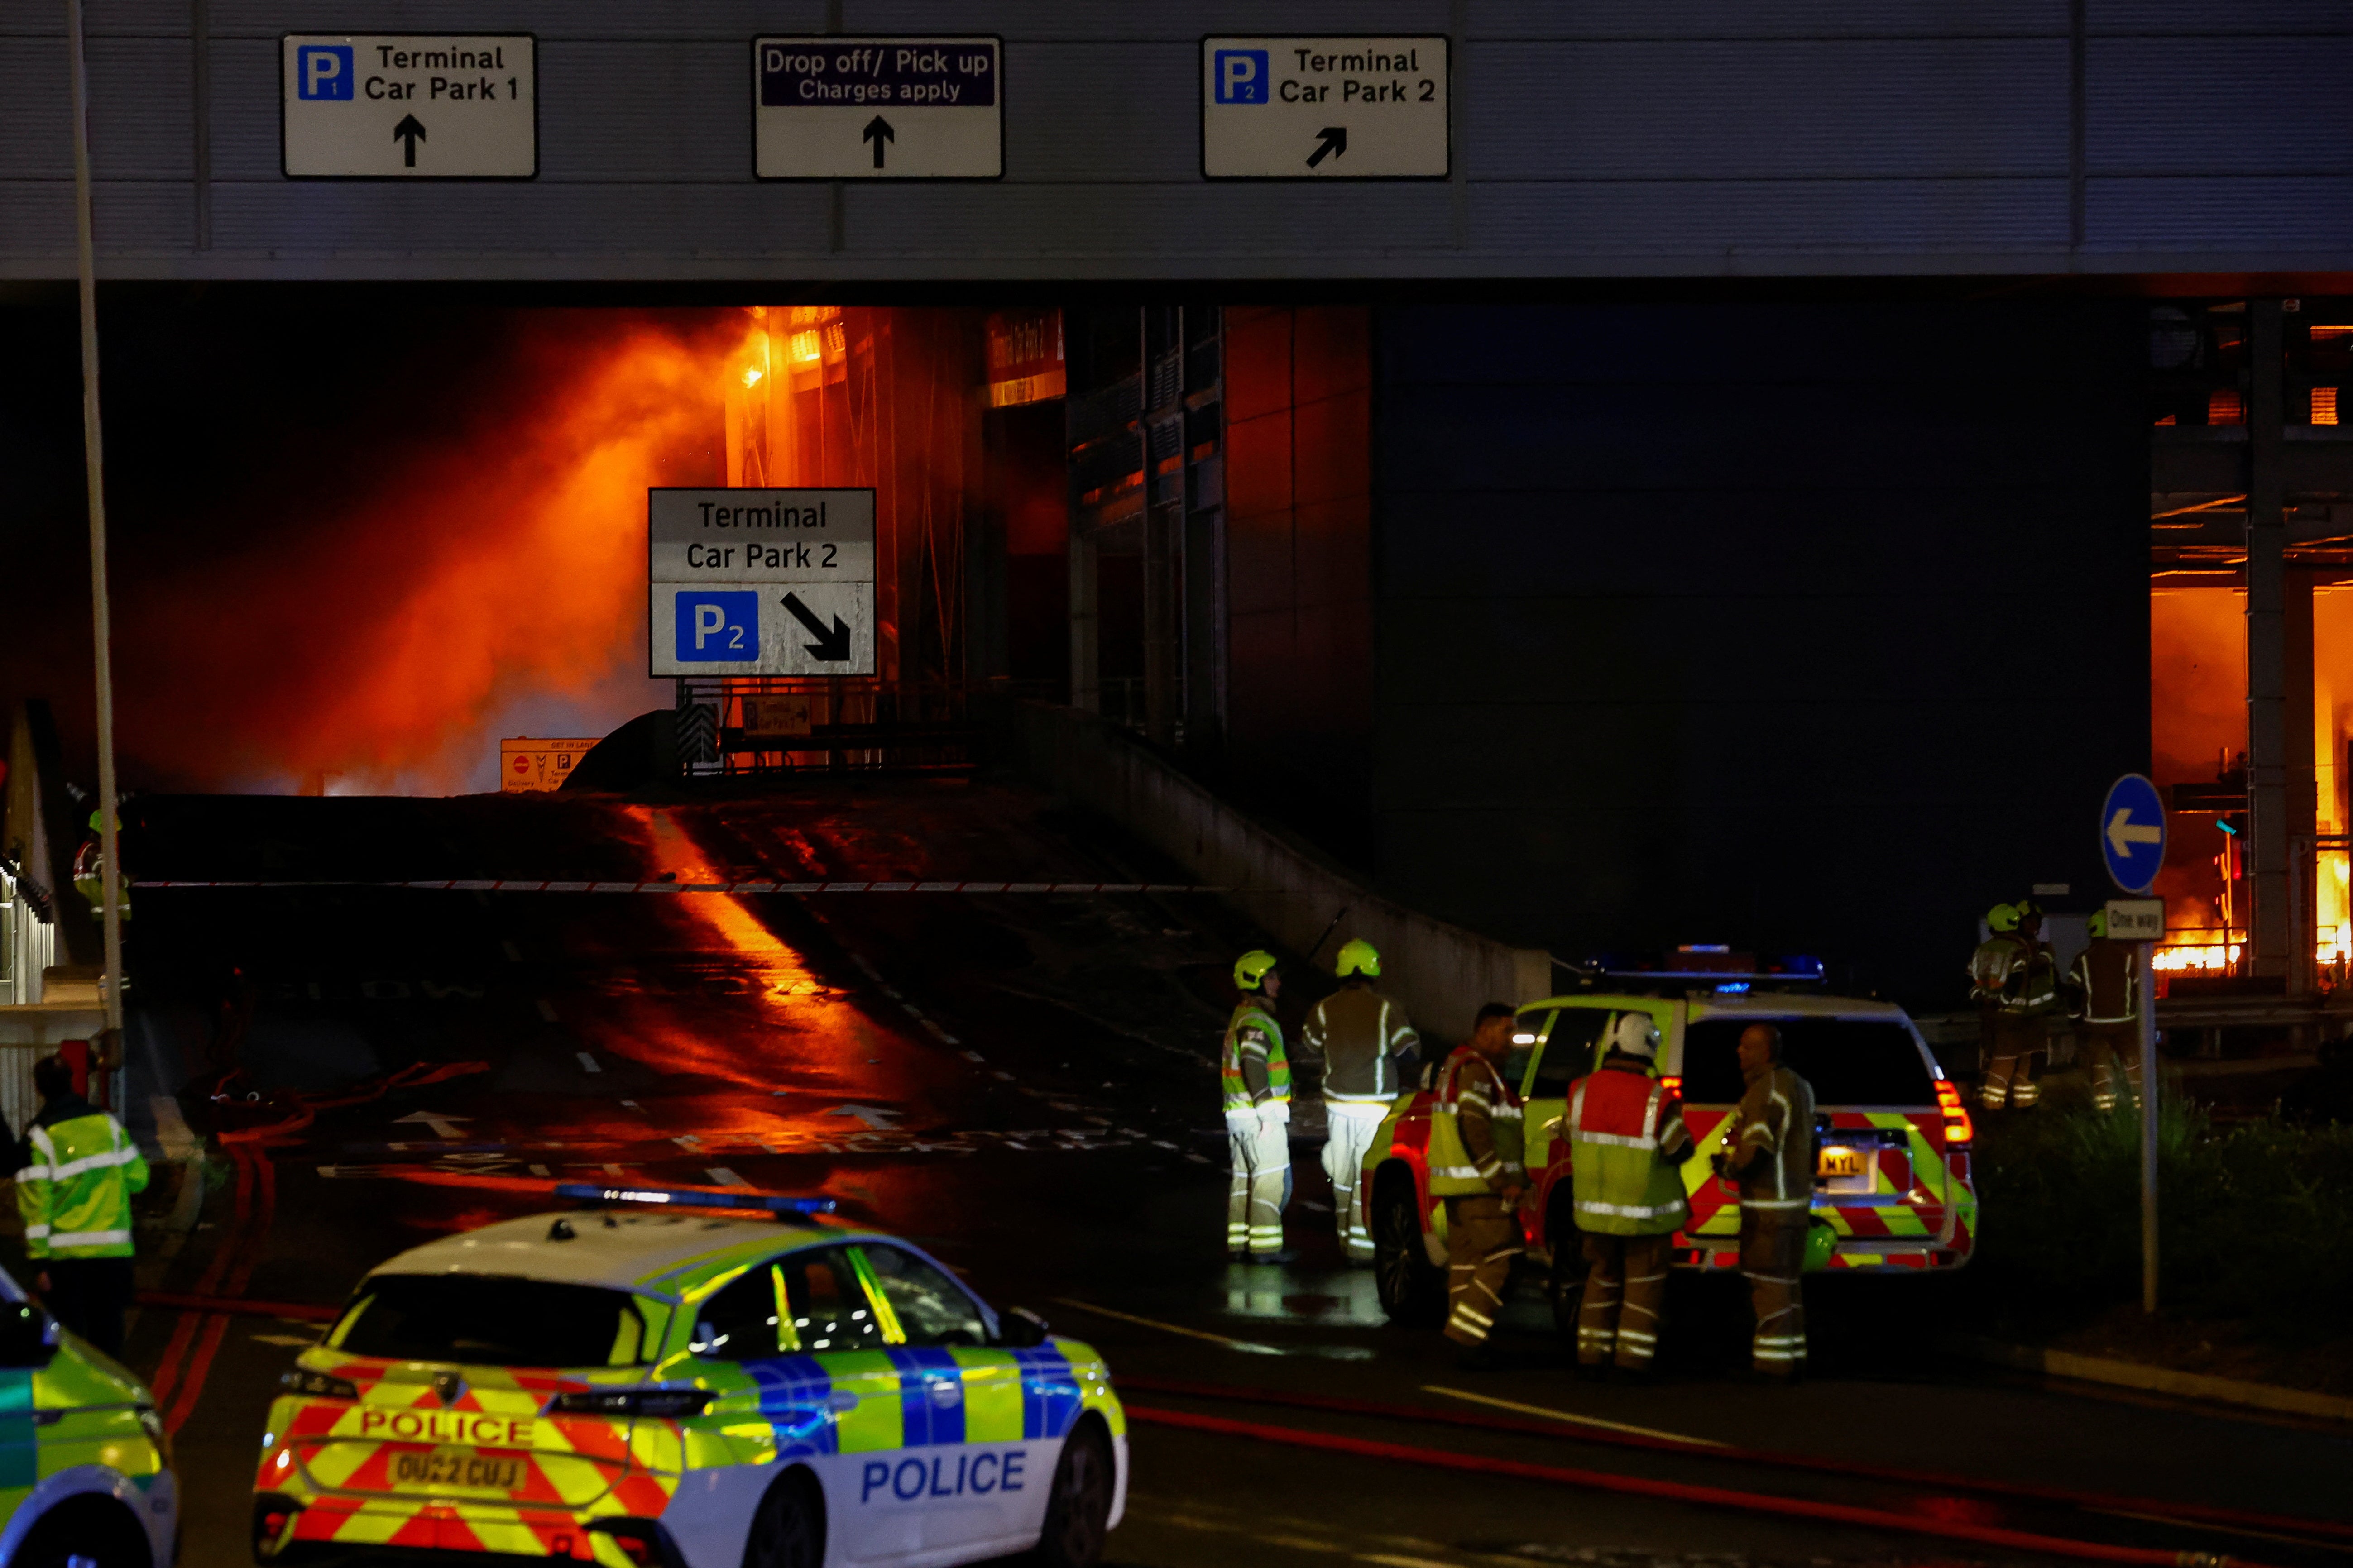 Emergency services respond to a fire in Terminal Car Park 2 at London Luton Airport